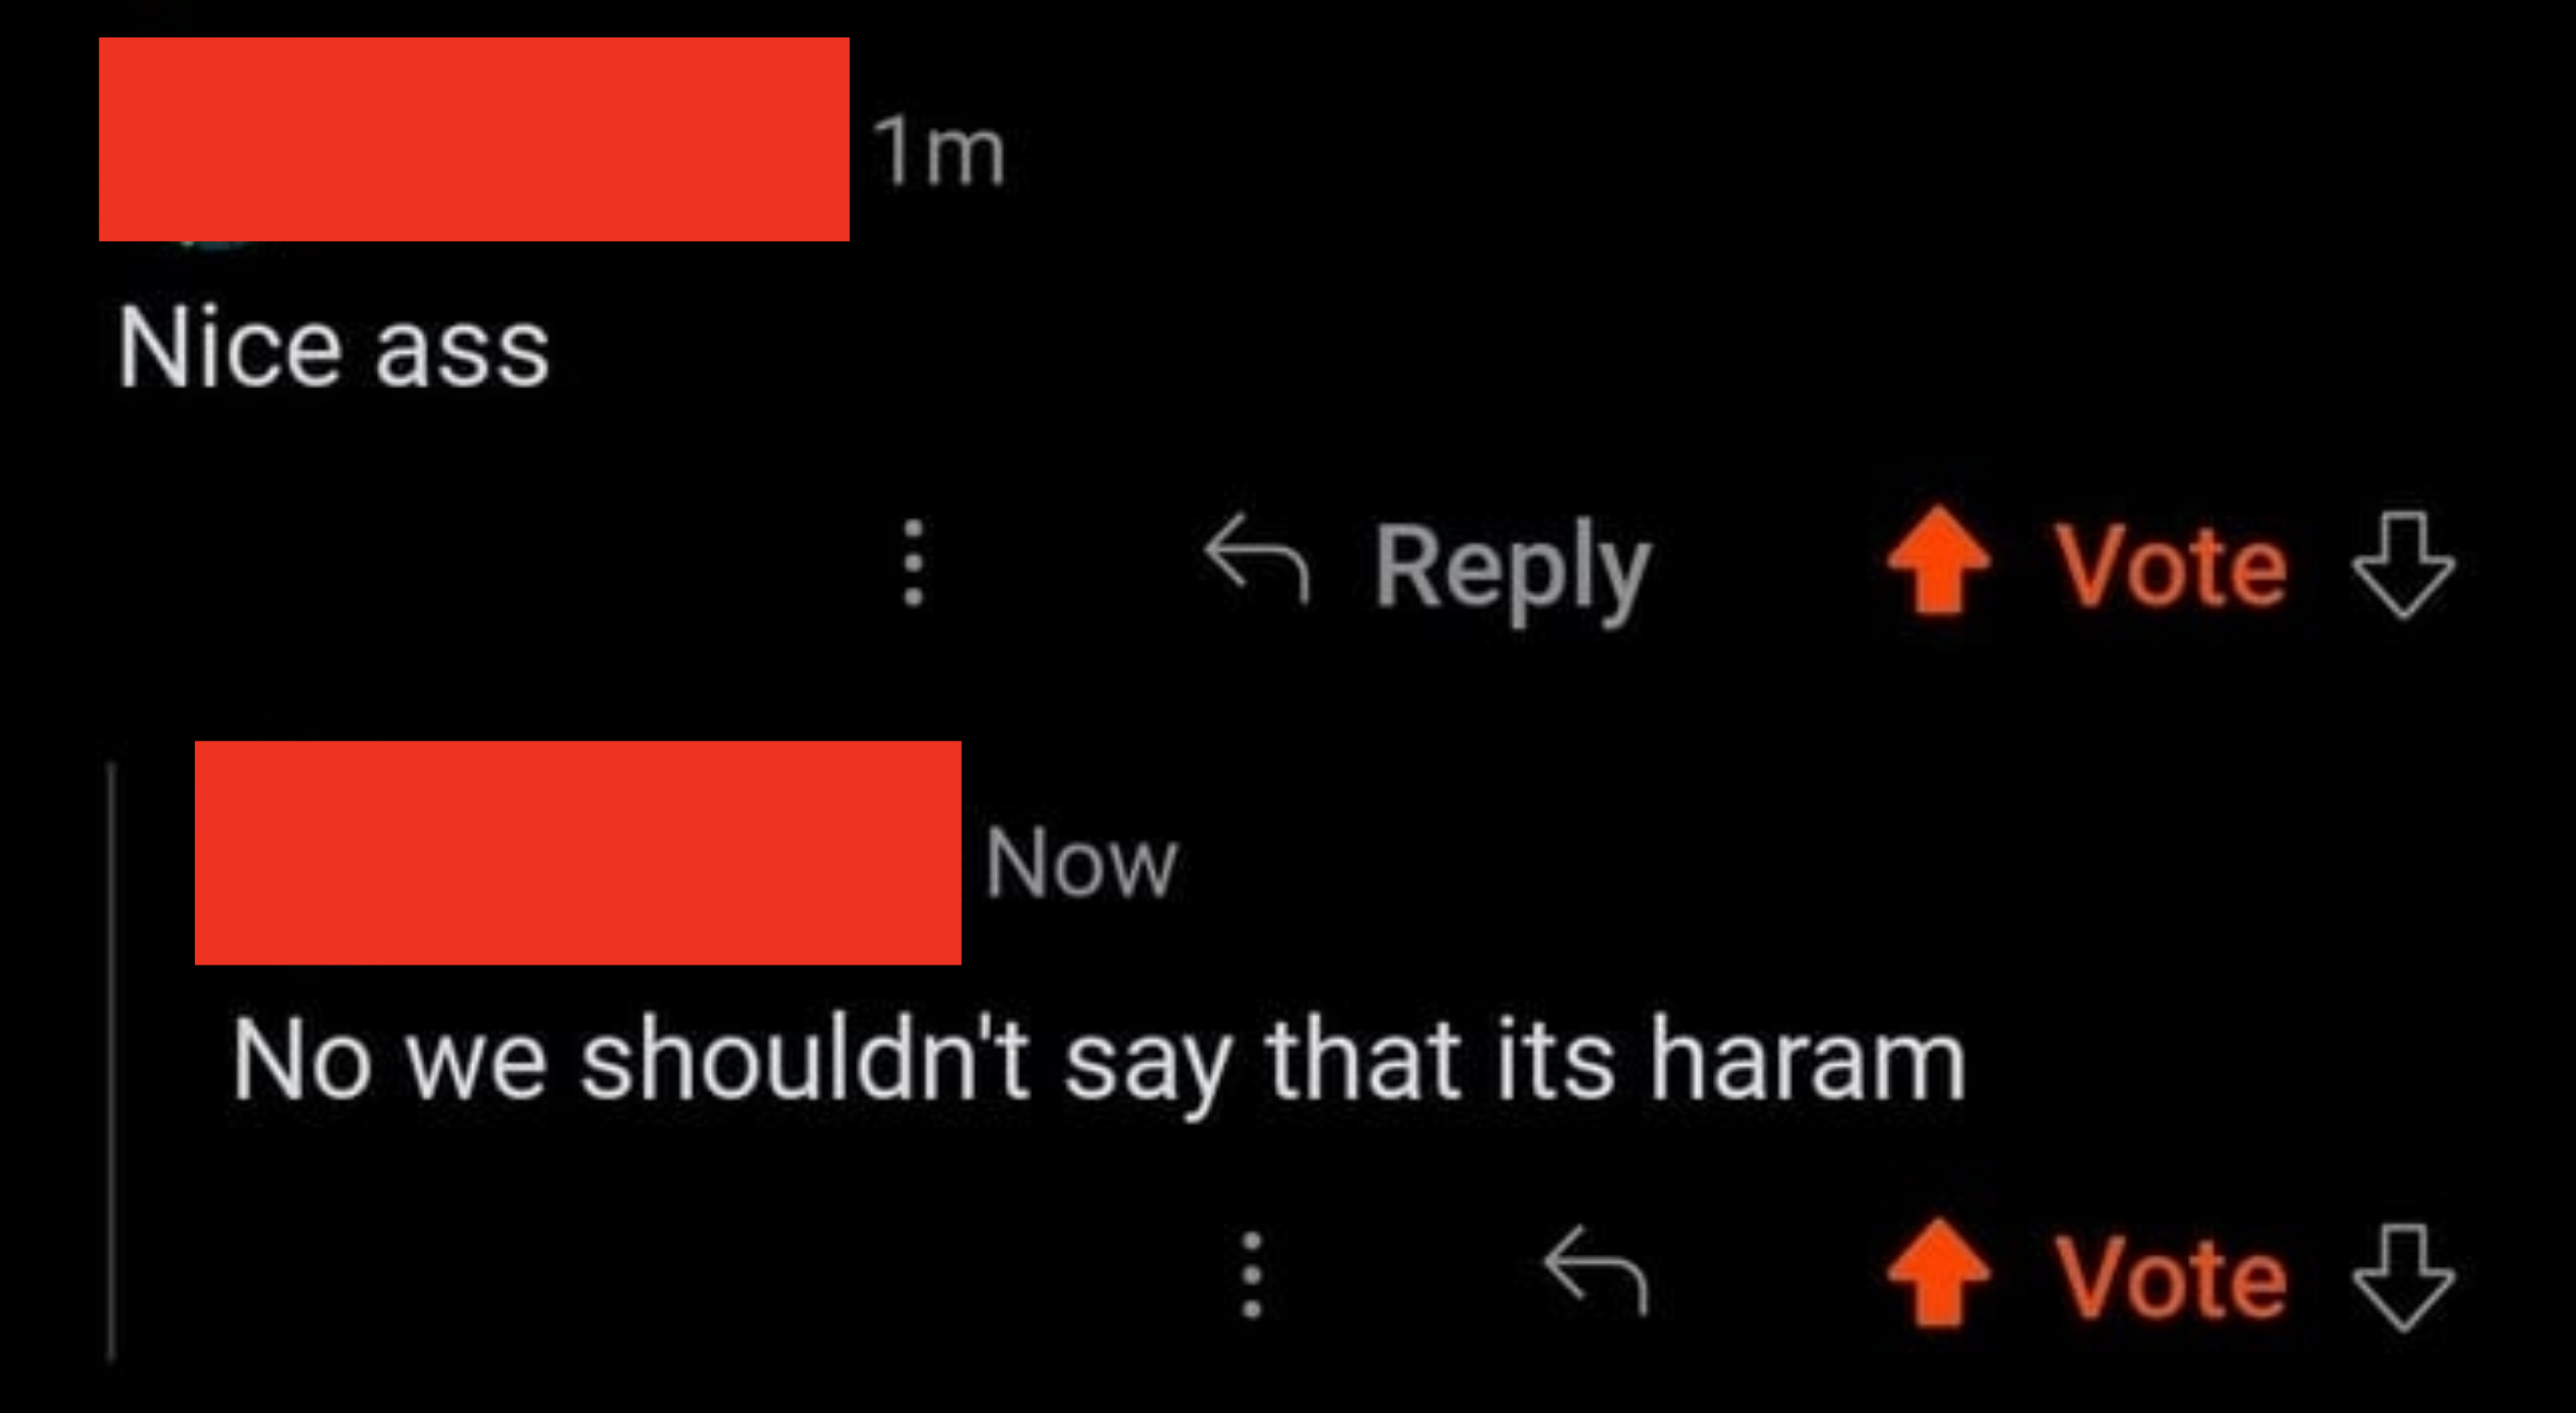 person says nice ass and the other responds, no we shouldnt say that its harm